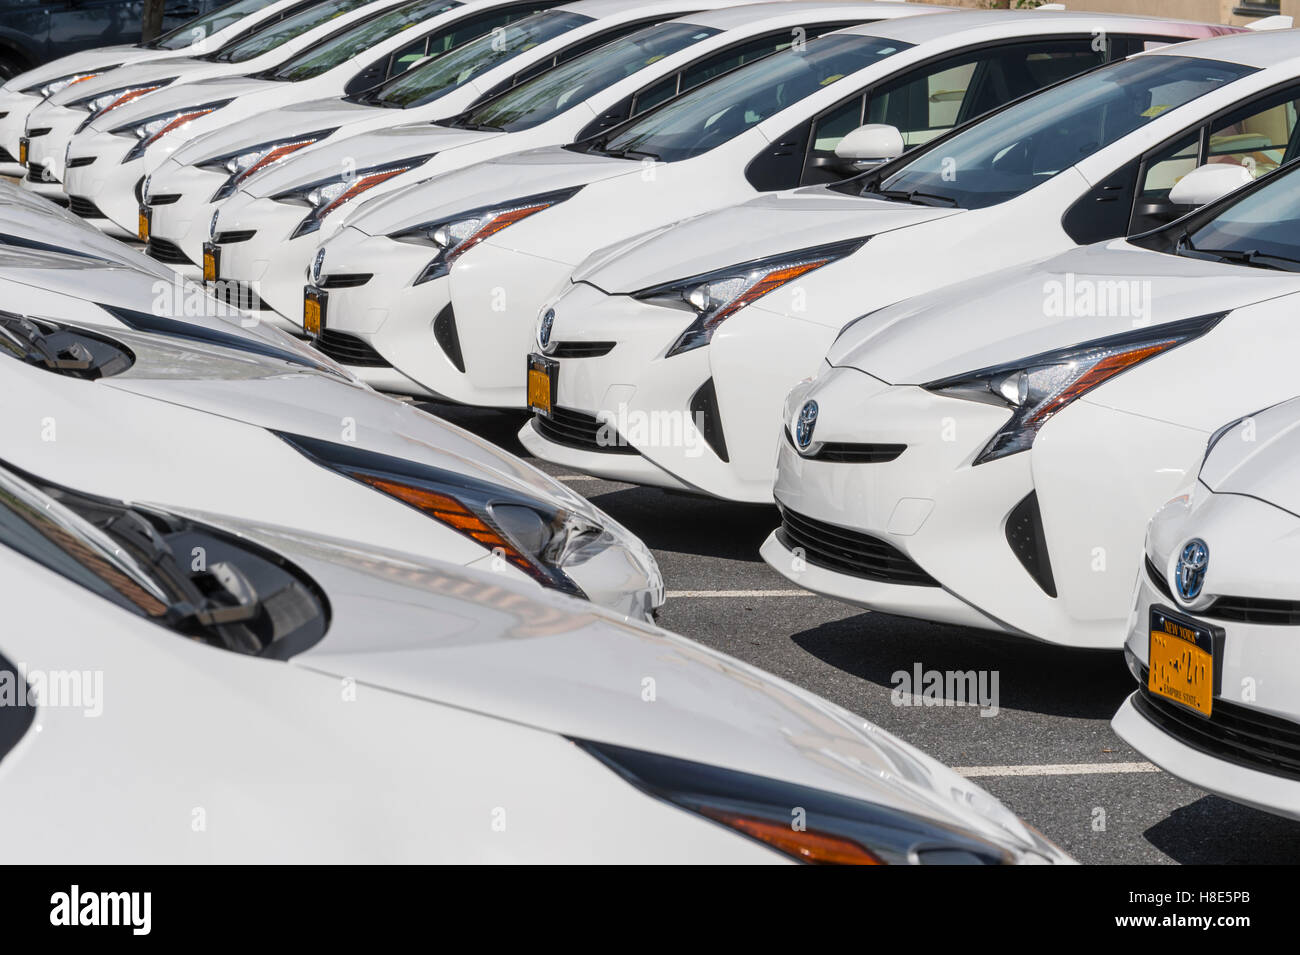 Rows Of White Cars In Car Dealership Parking Lot Stock Photo